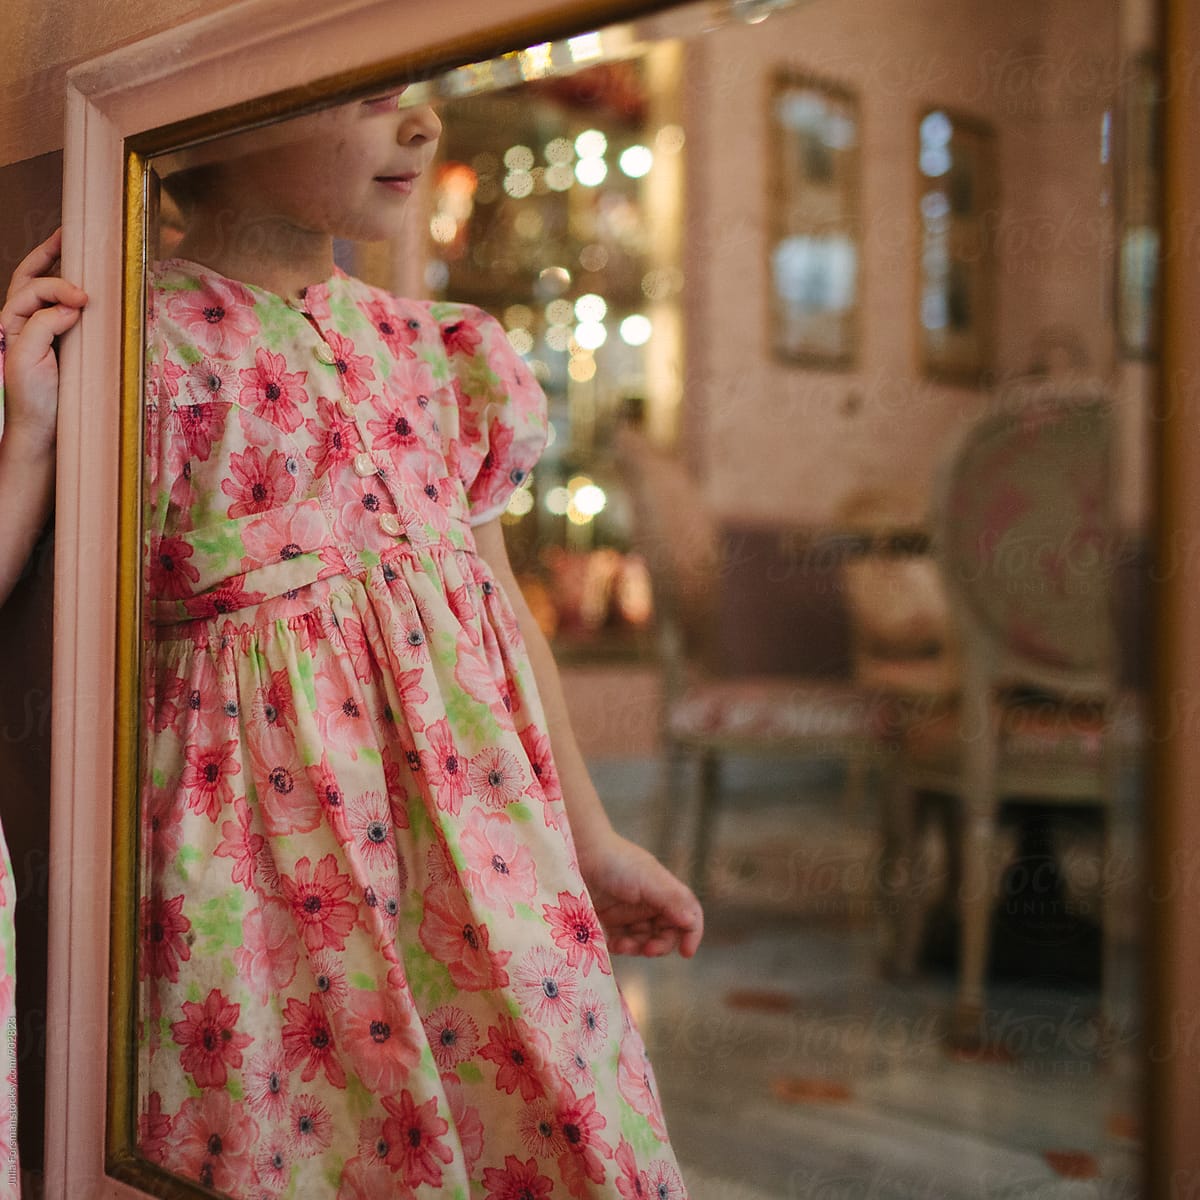 Little girl in party dress seen reflected in a mirror.